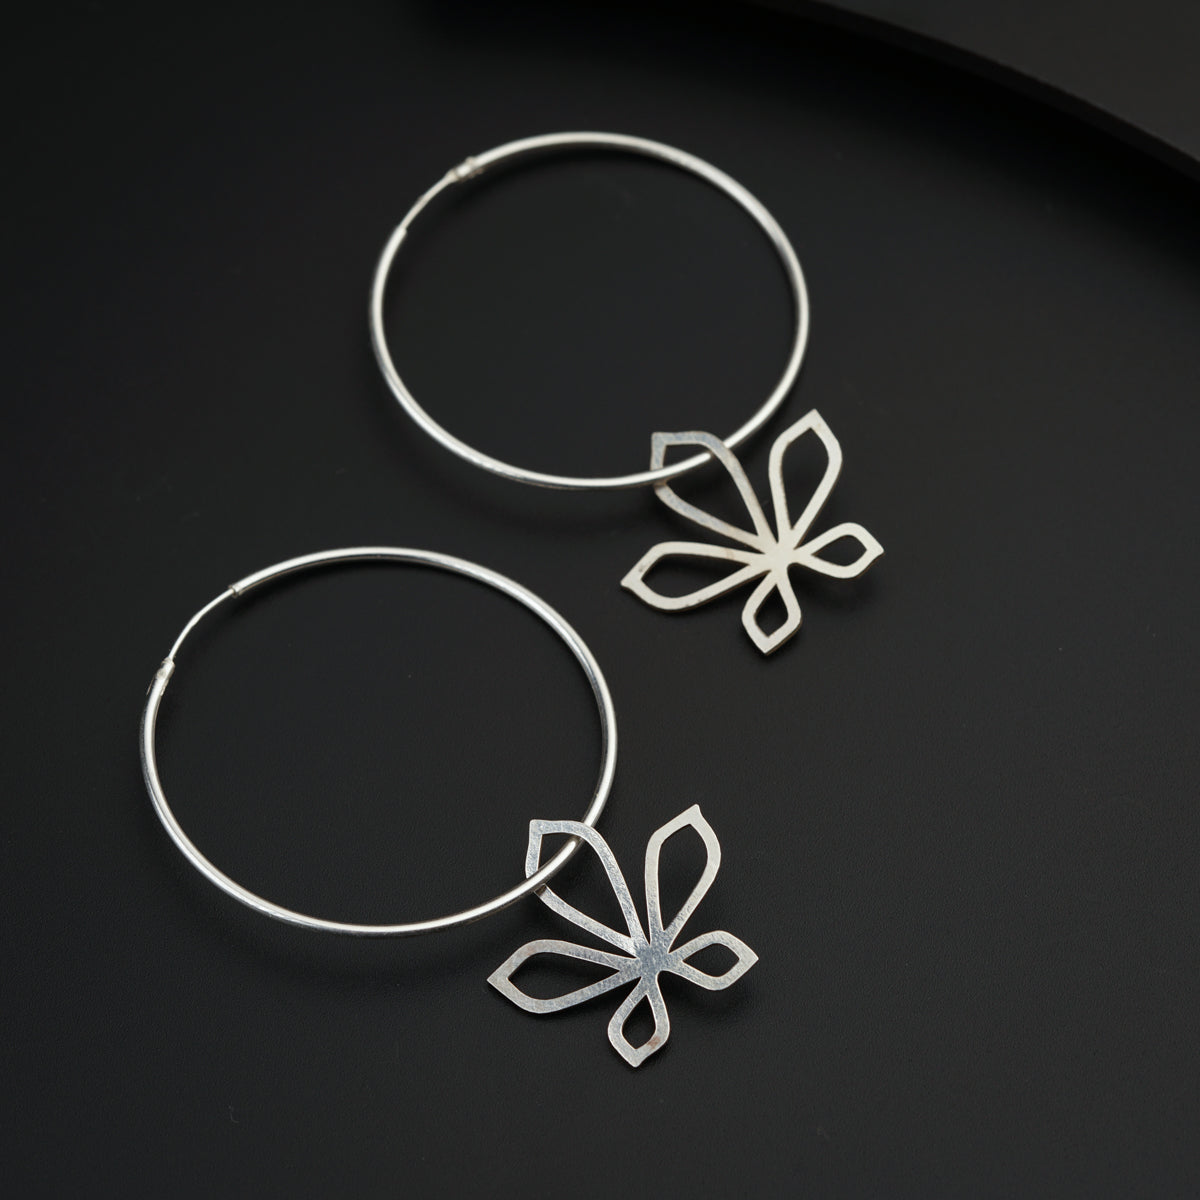 a pair of silver hoop earrings with a flower design